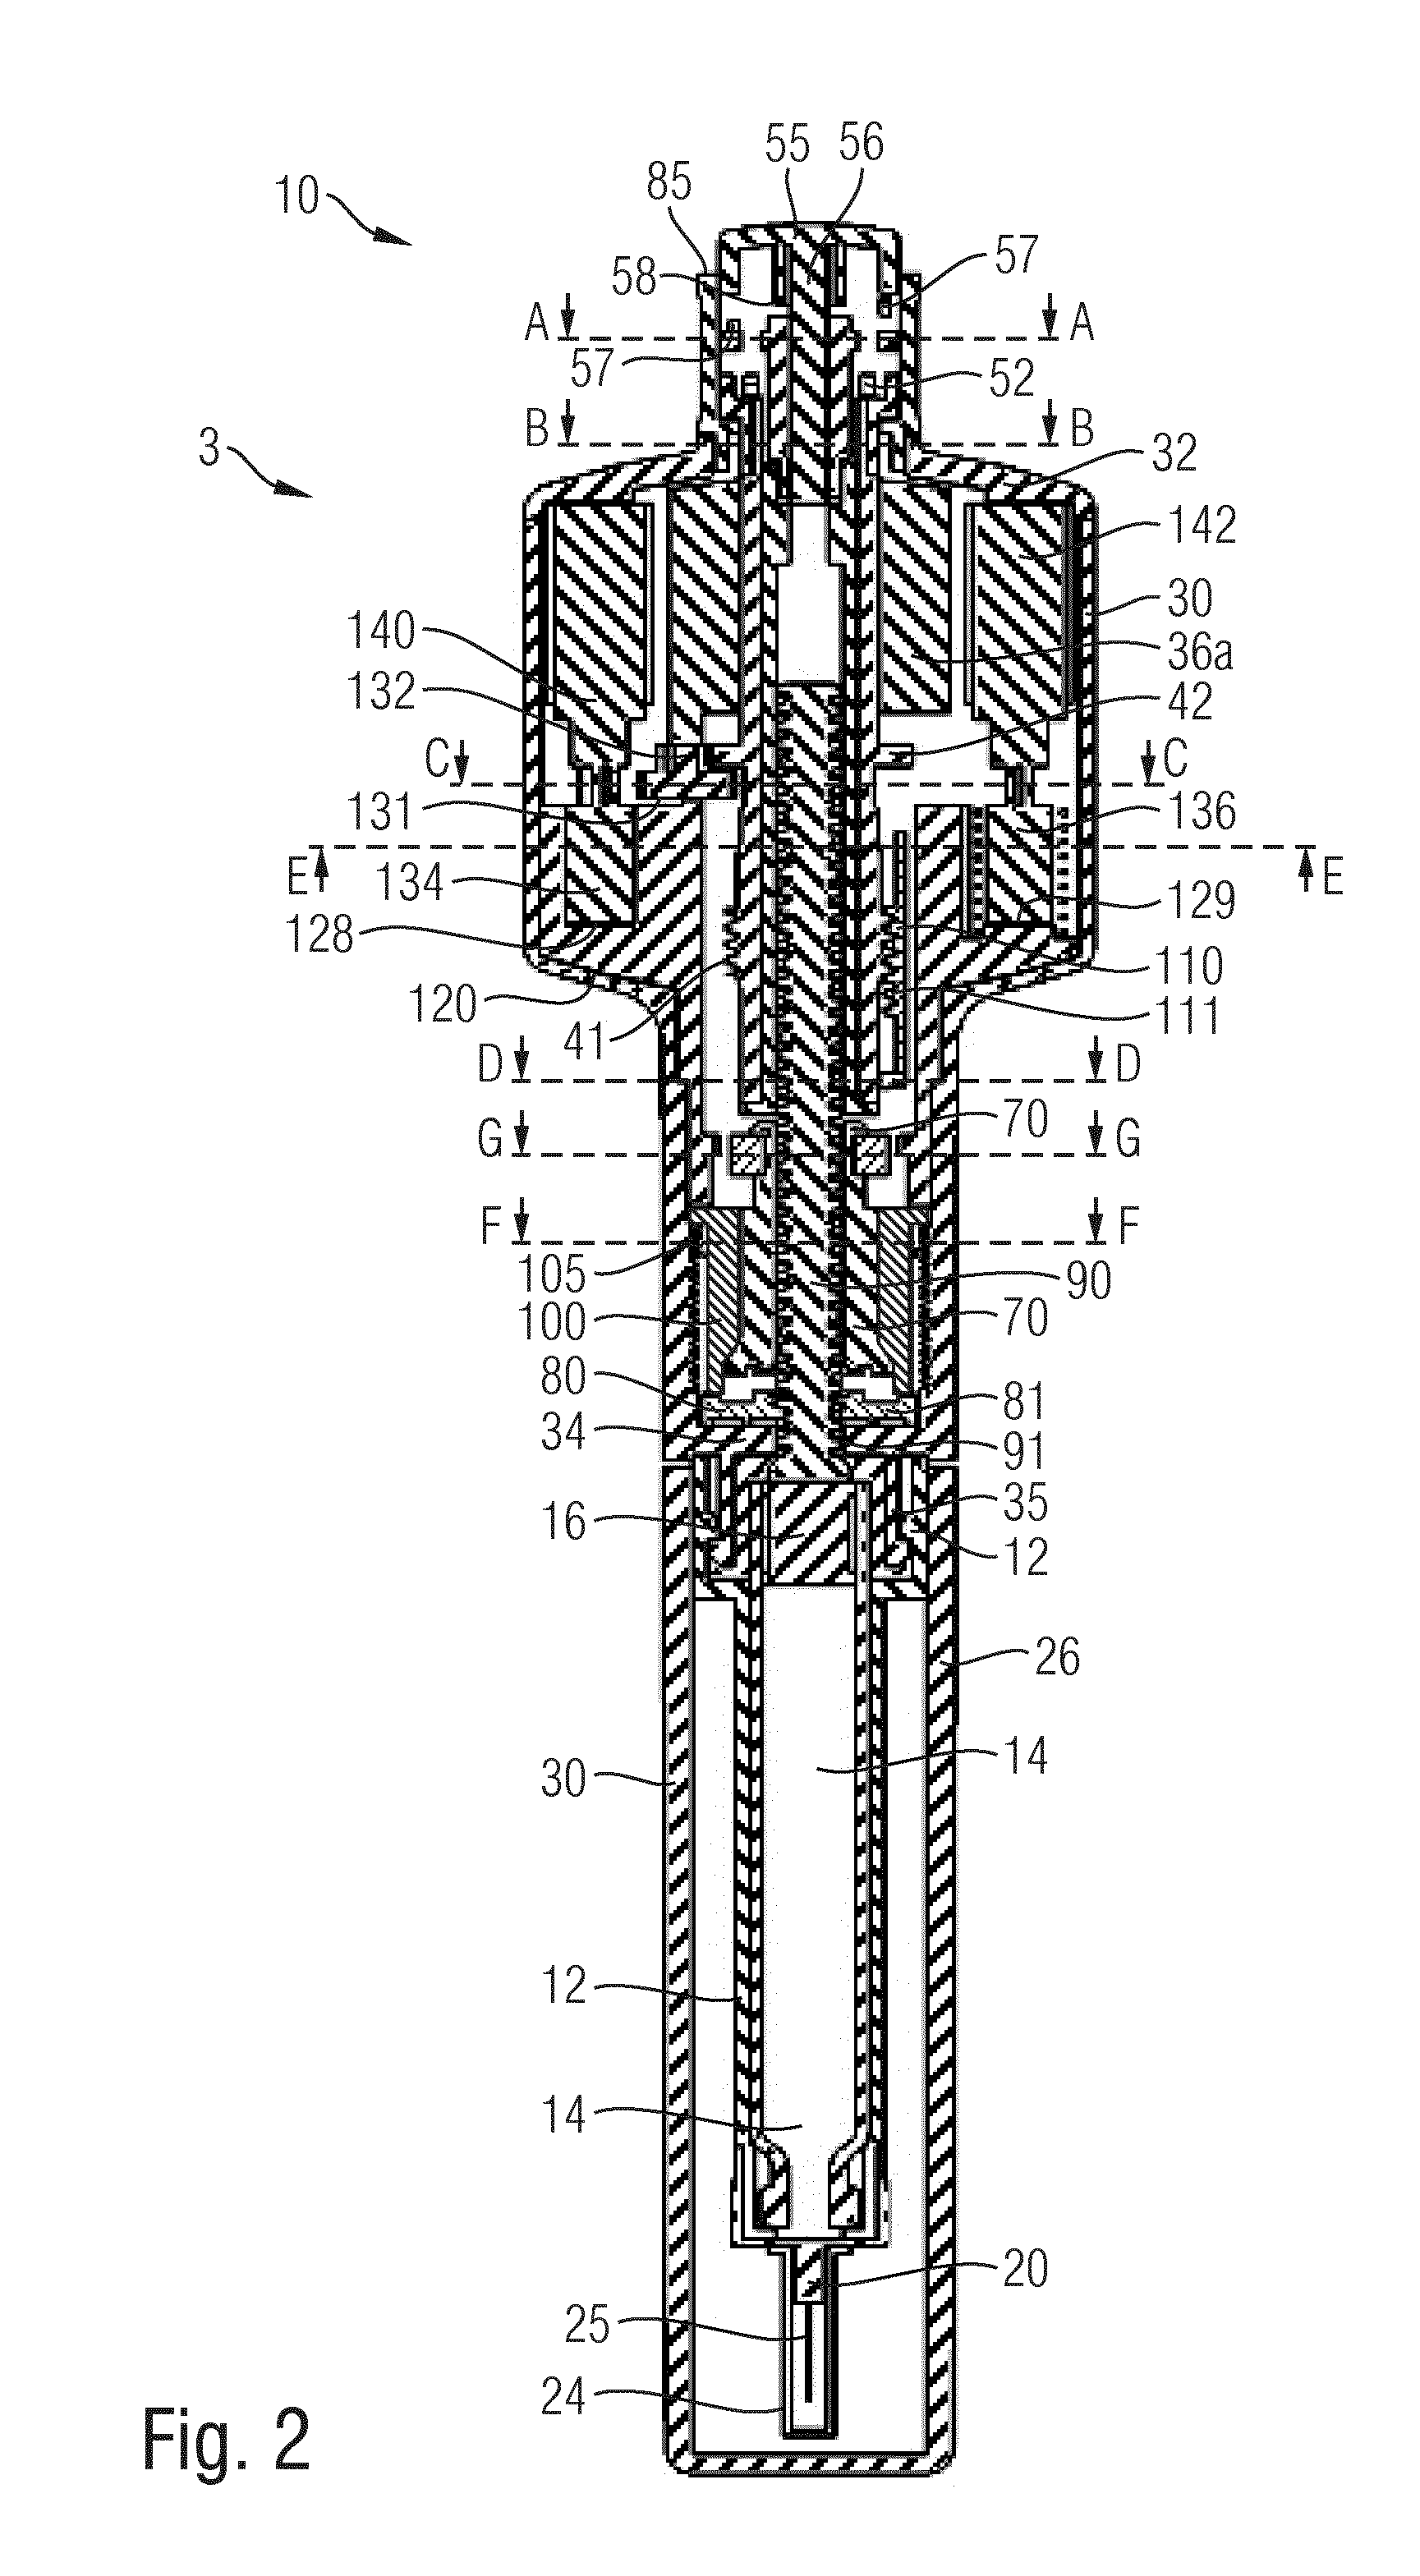 Drive mechanism of a drug delivery device